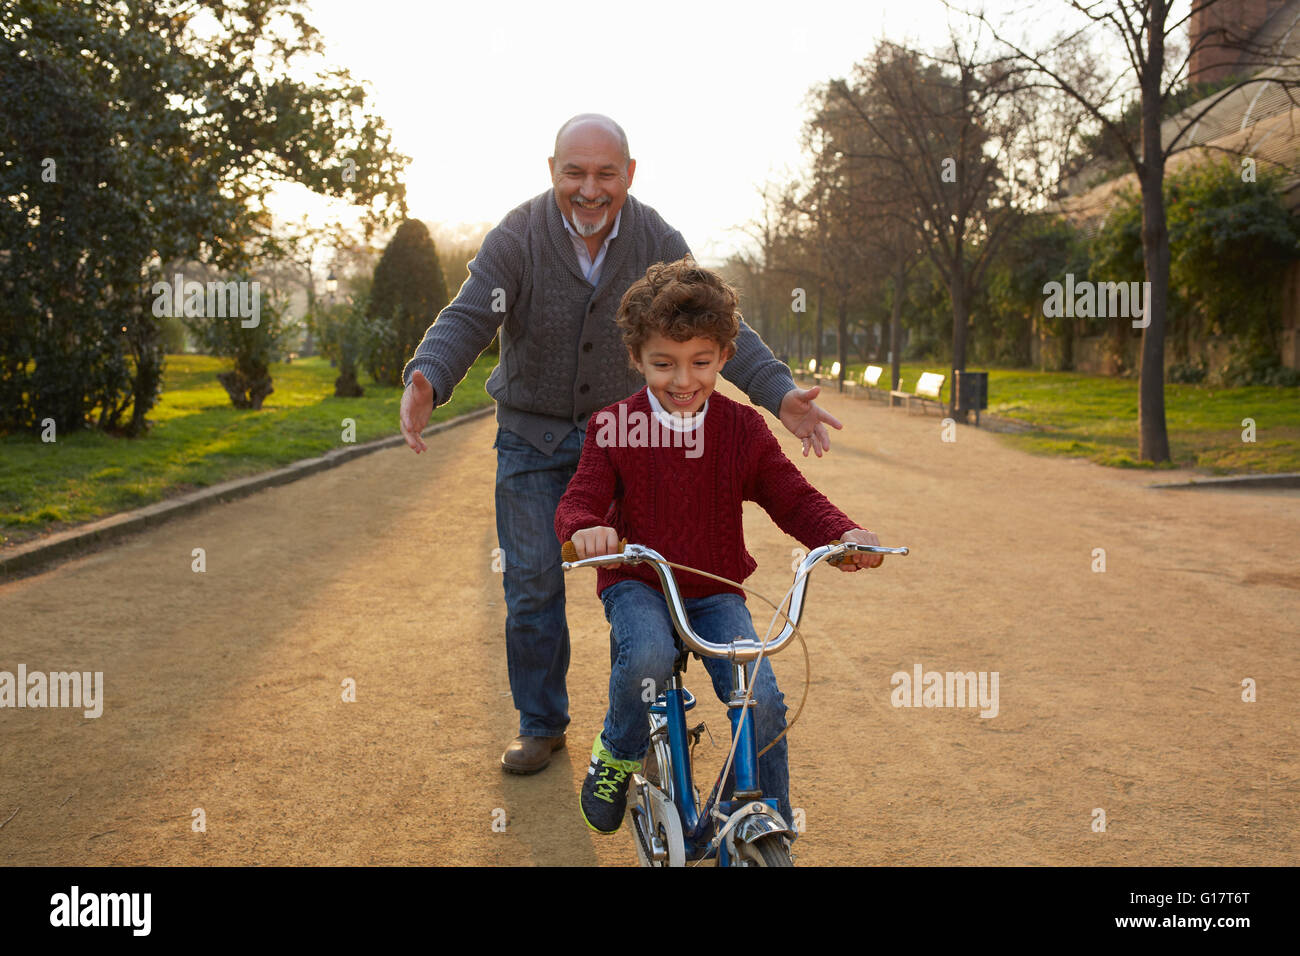 Grandfather teaching grandson to ride bicycle in park Stock Photo